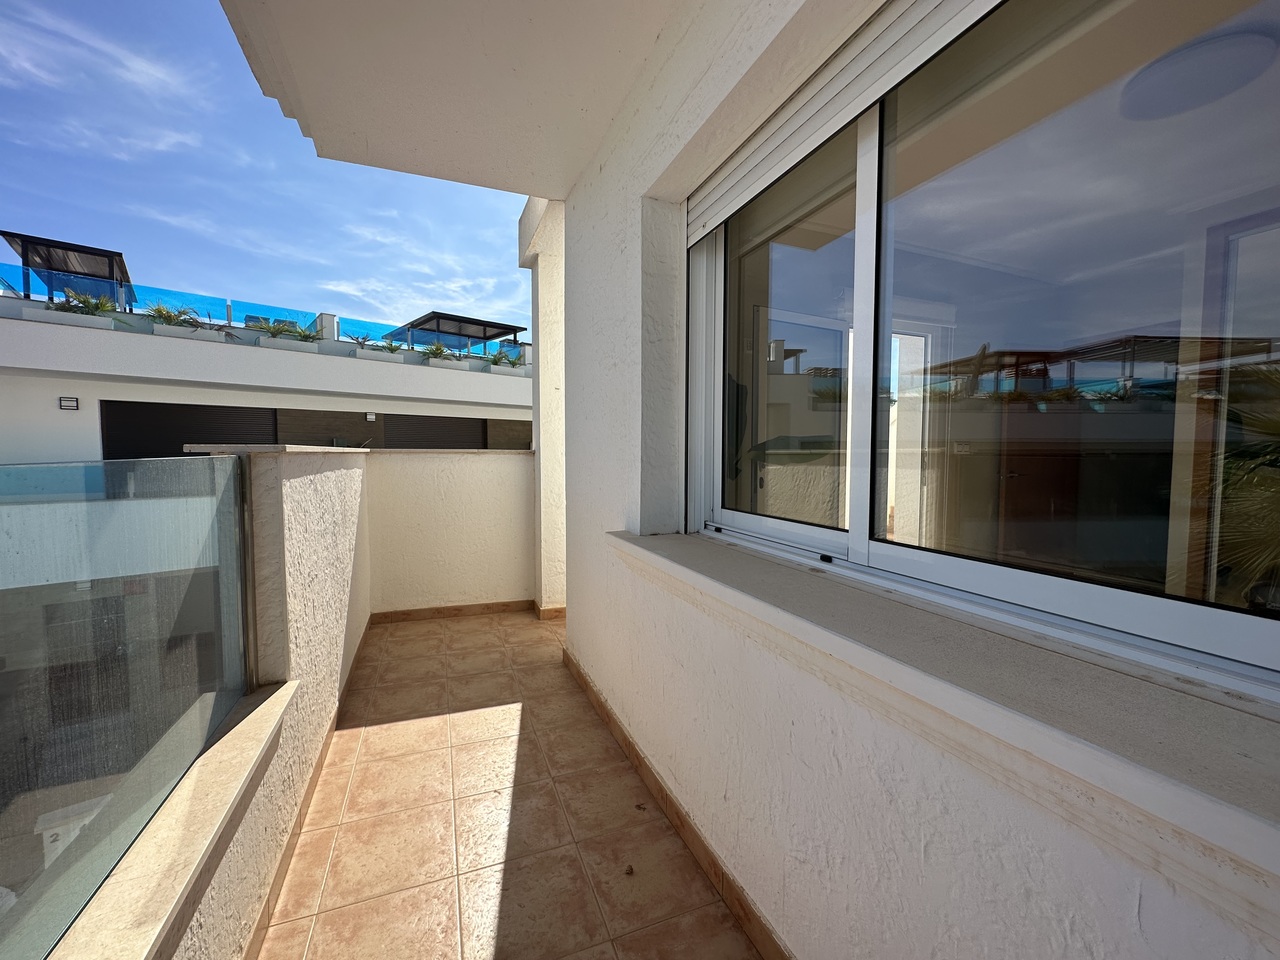 SWNB7189-1-1-1: Townhouse for sale in Los Balcones